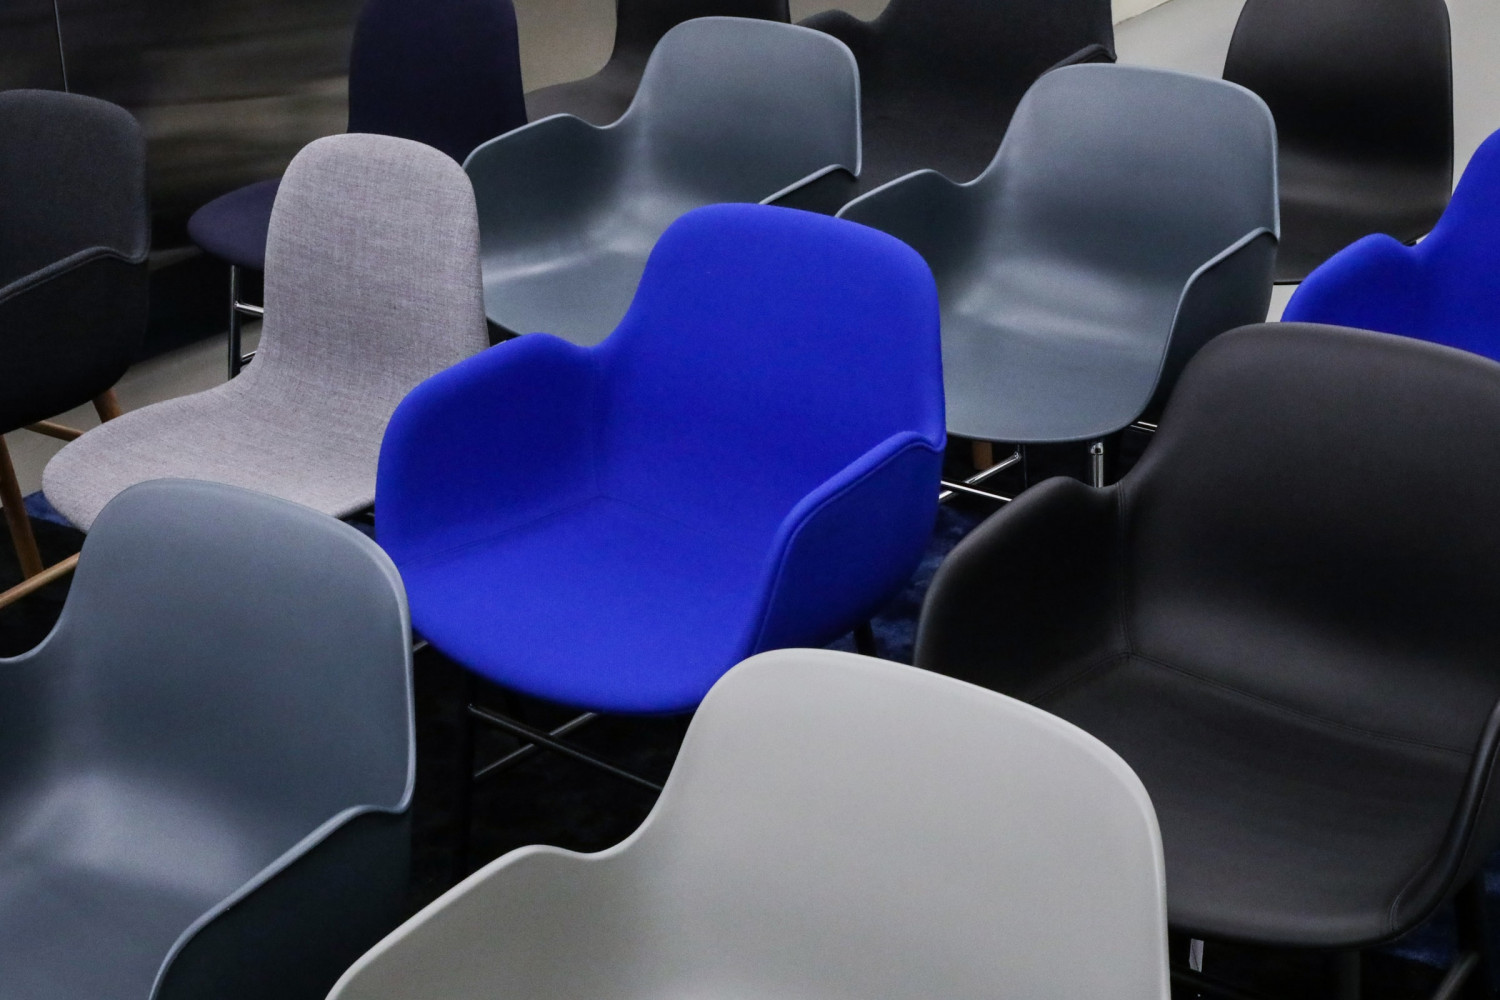 Image of a group of chairs